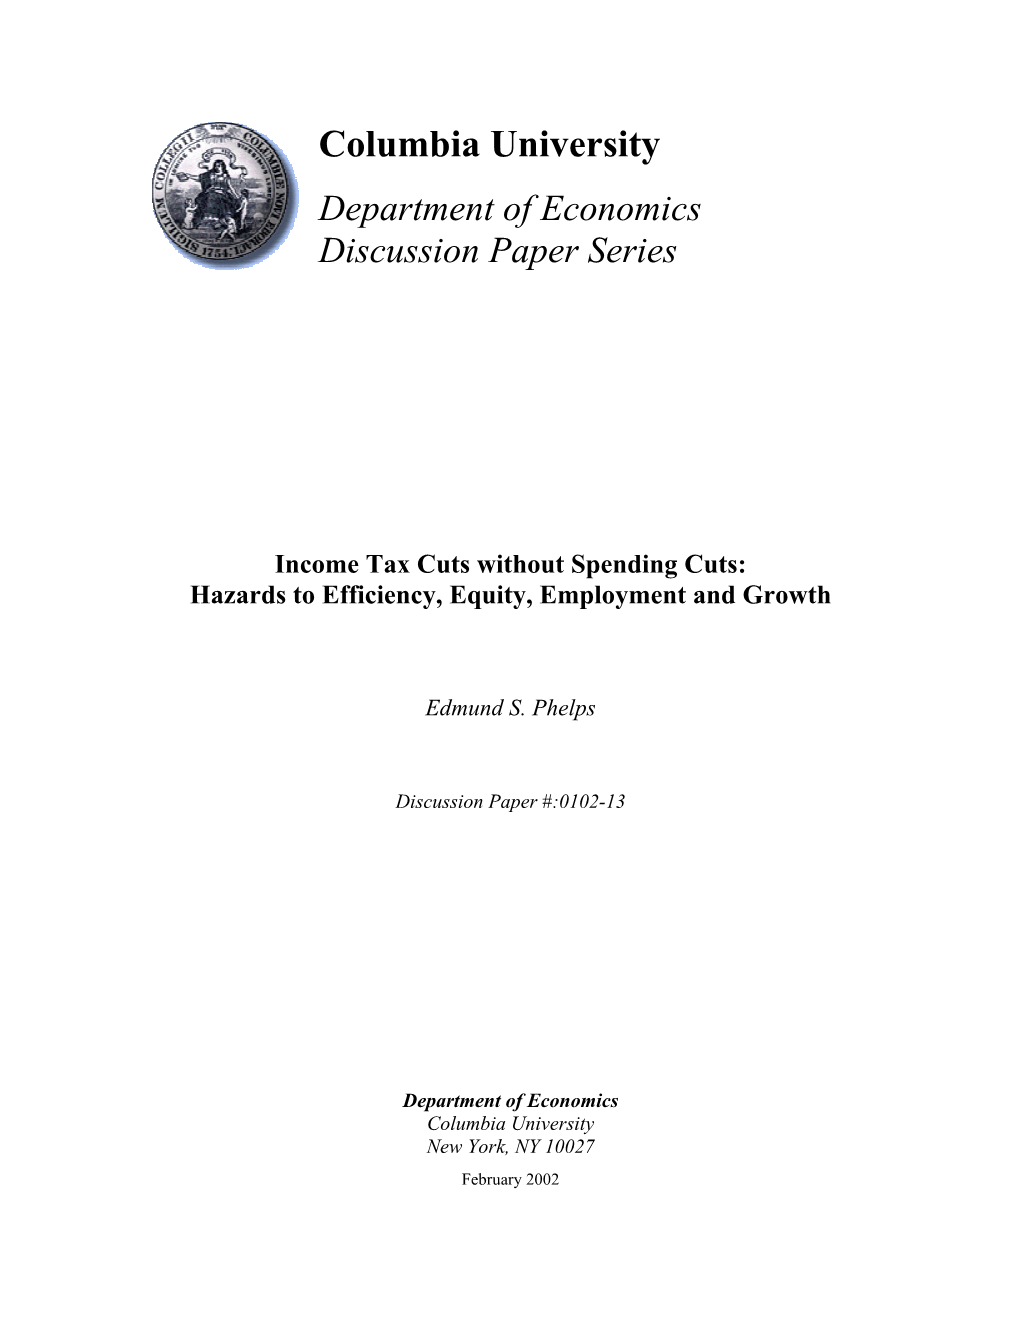 Income Tax Cuts Without Spending Cuts: Hazards to Efficiency, Equity, Employment and Growth